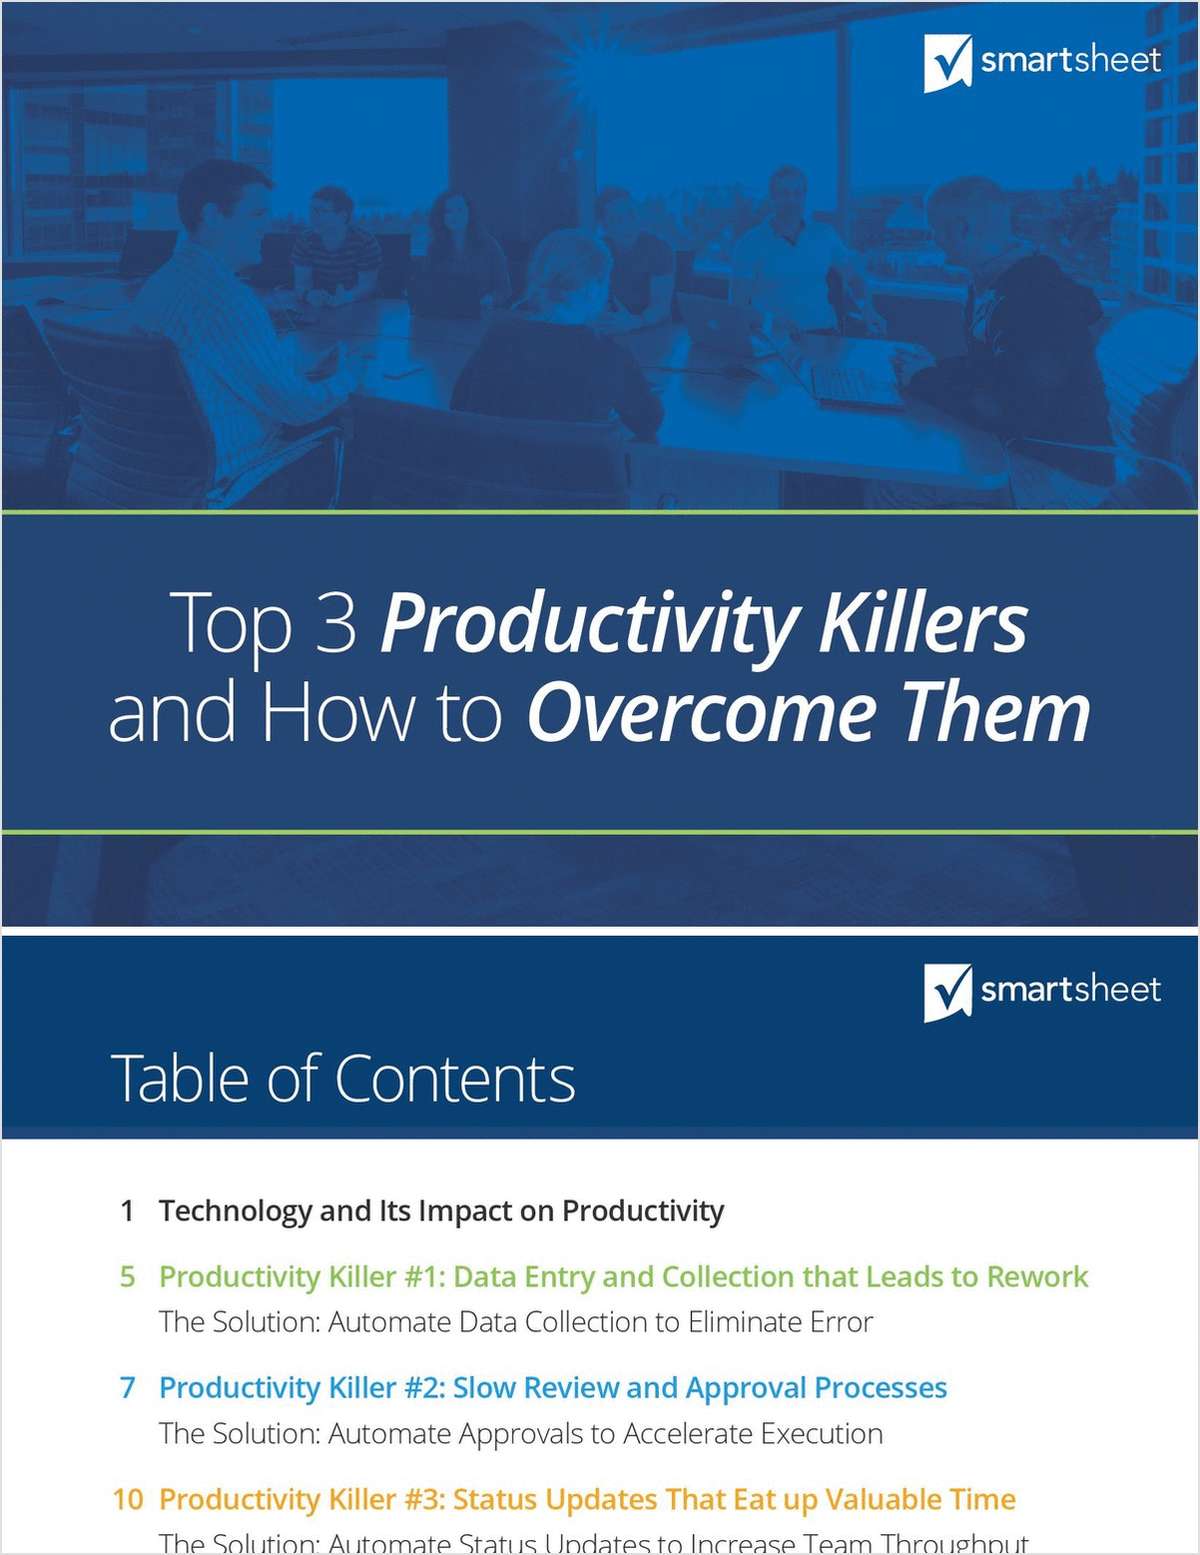 Top 3 Productivity Killers and How to Overcome Them